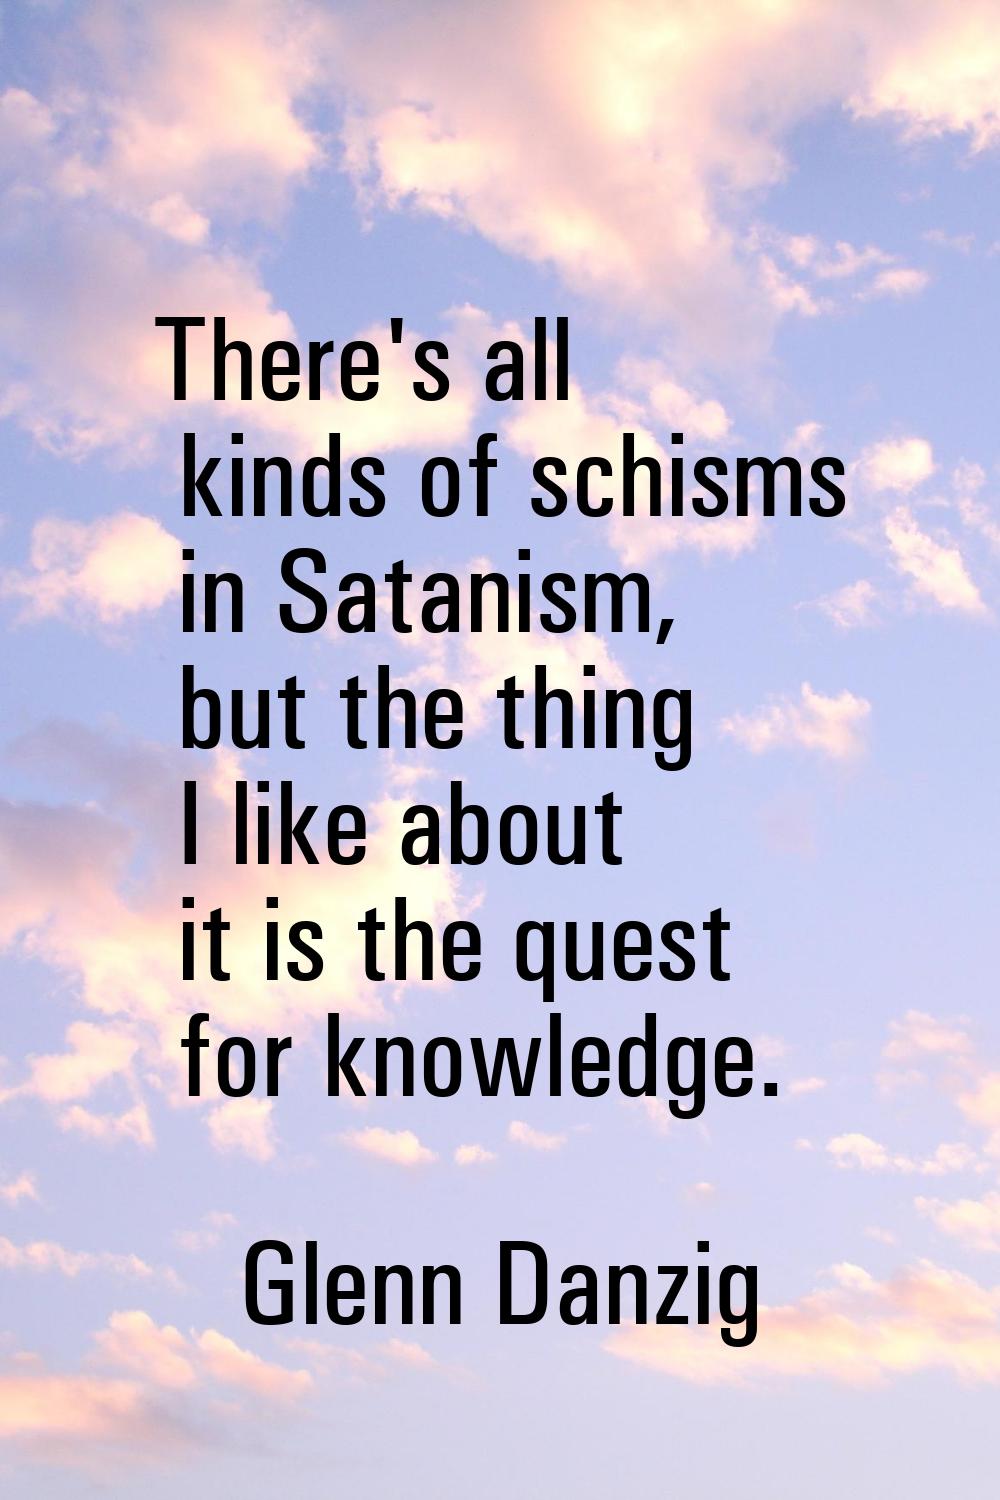 There's all kinds of schisms in Satanism, but the thing I like about it is the quest for knowledge.